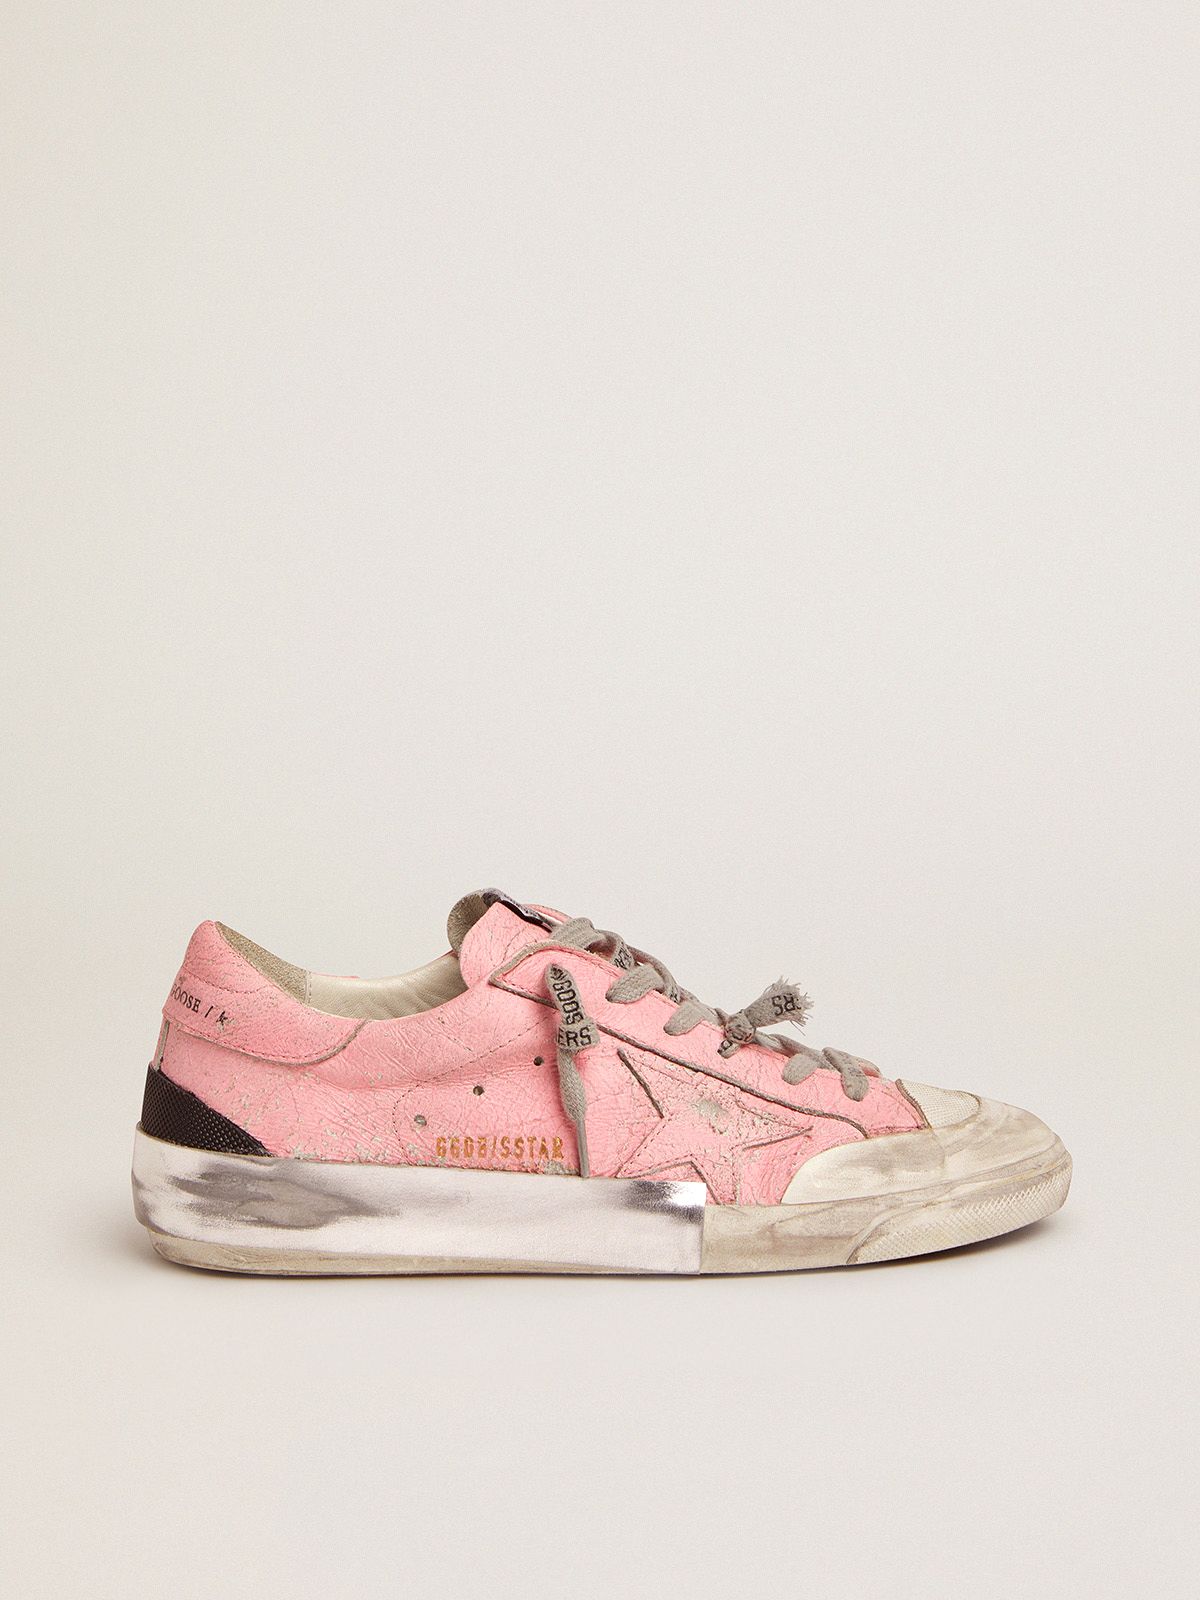 golden goose multi-foxing Super-Star and pink in leather crackled sneakers